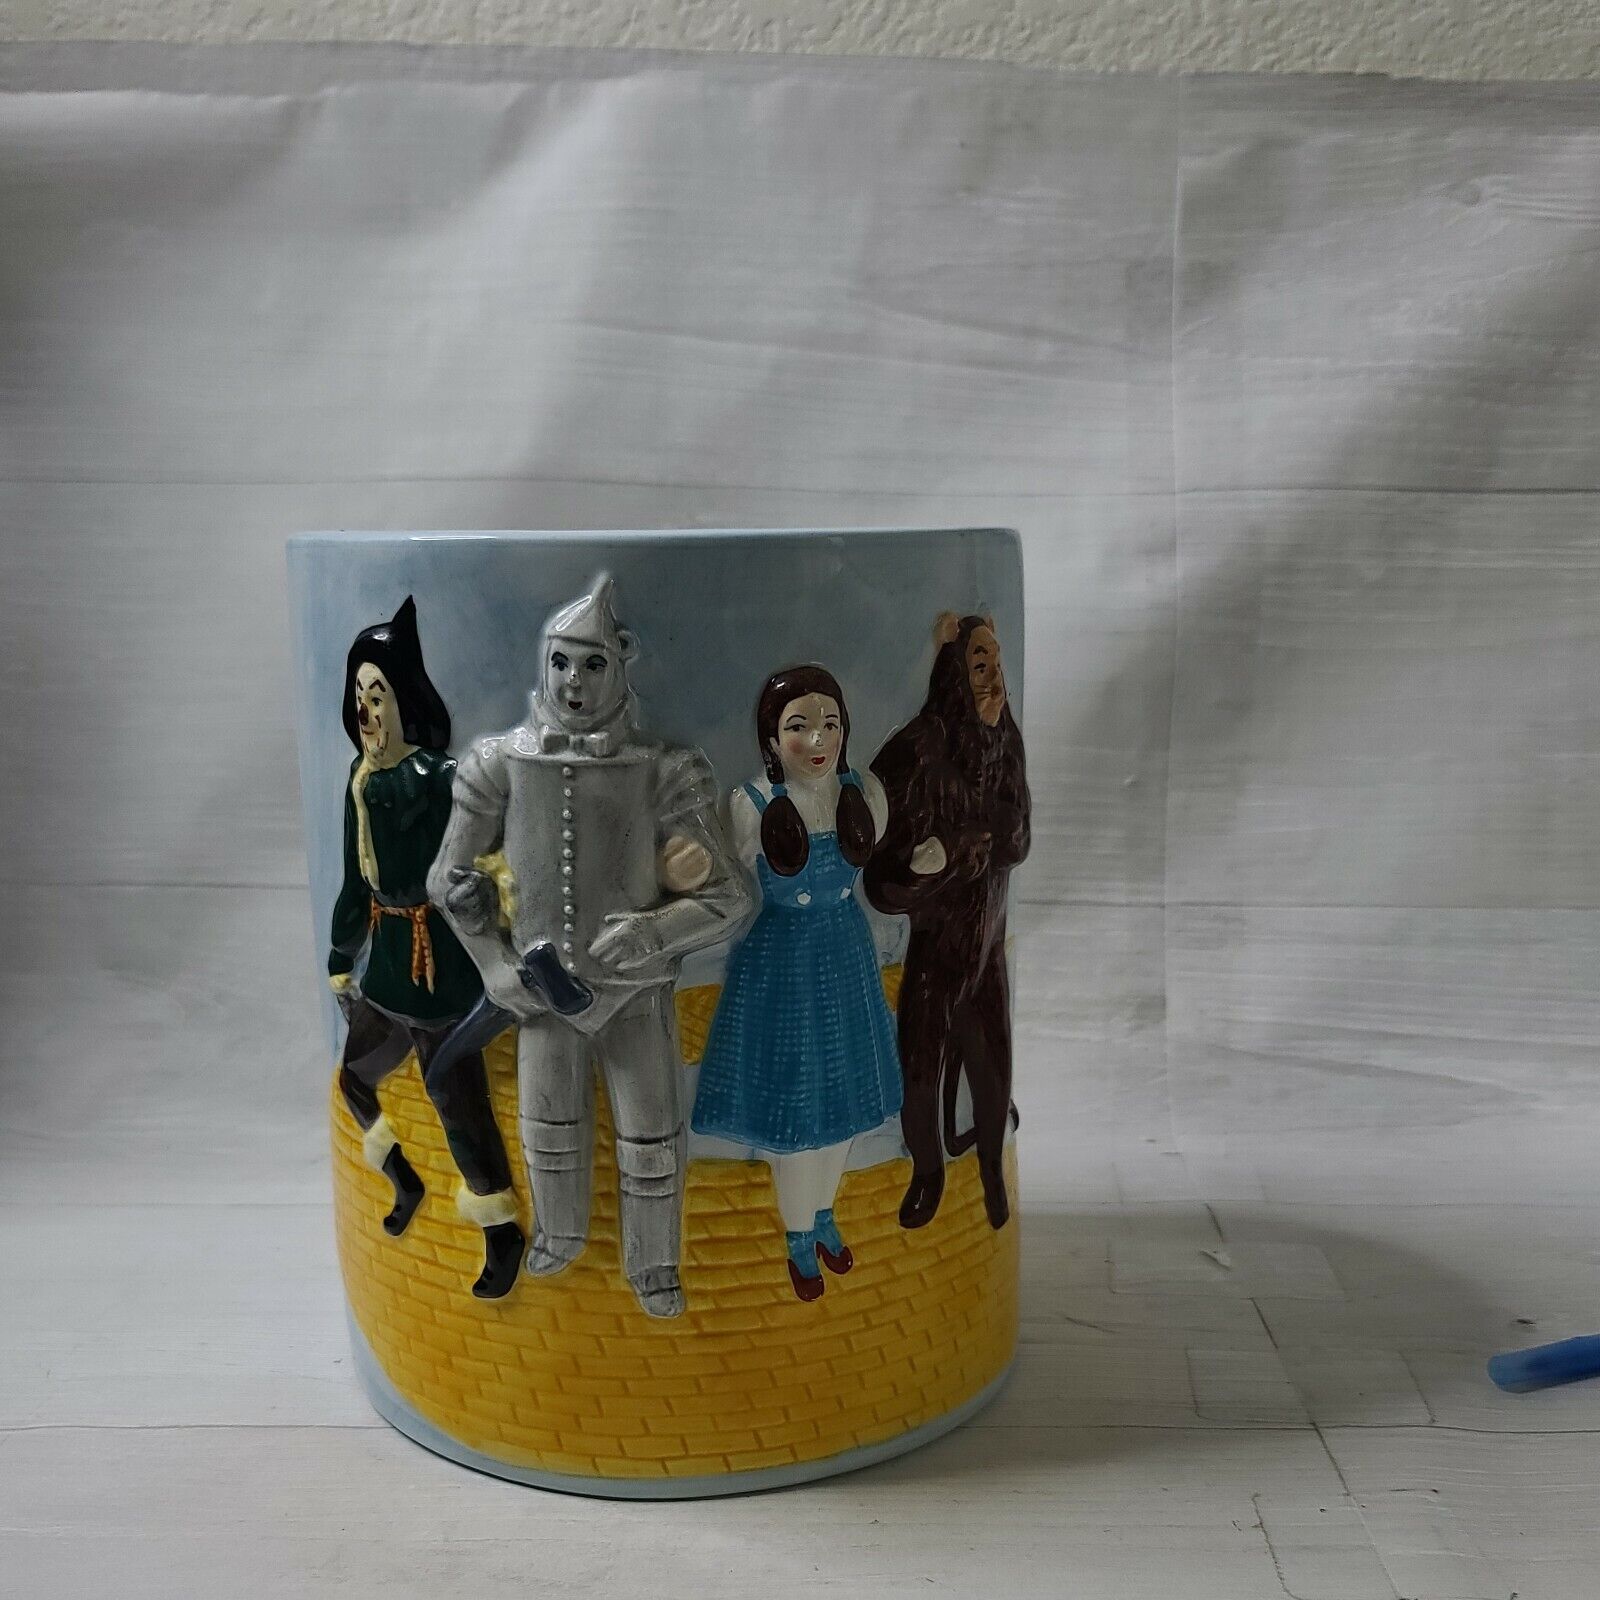 VTG 1998 The Wizard of Oz Cookie Jar “Theres no place like home” Star Jar NO LID